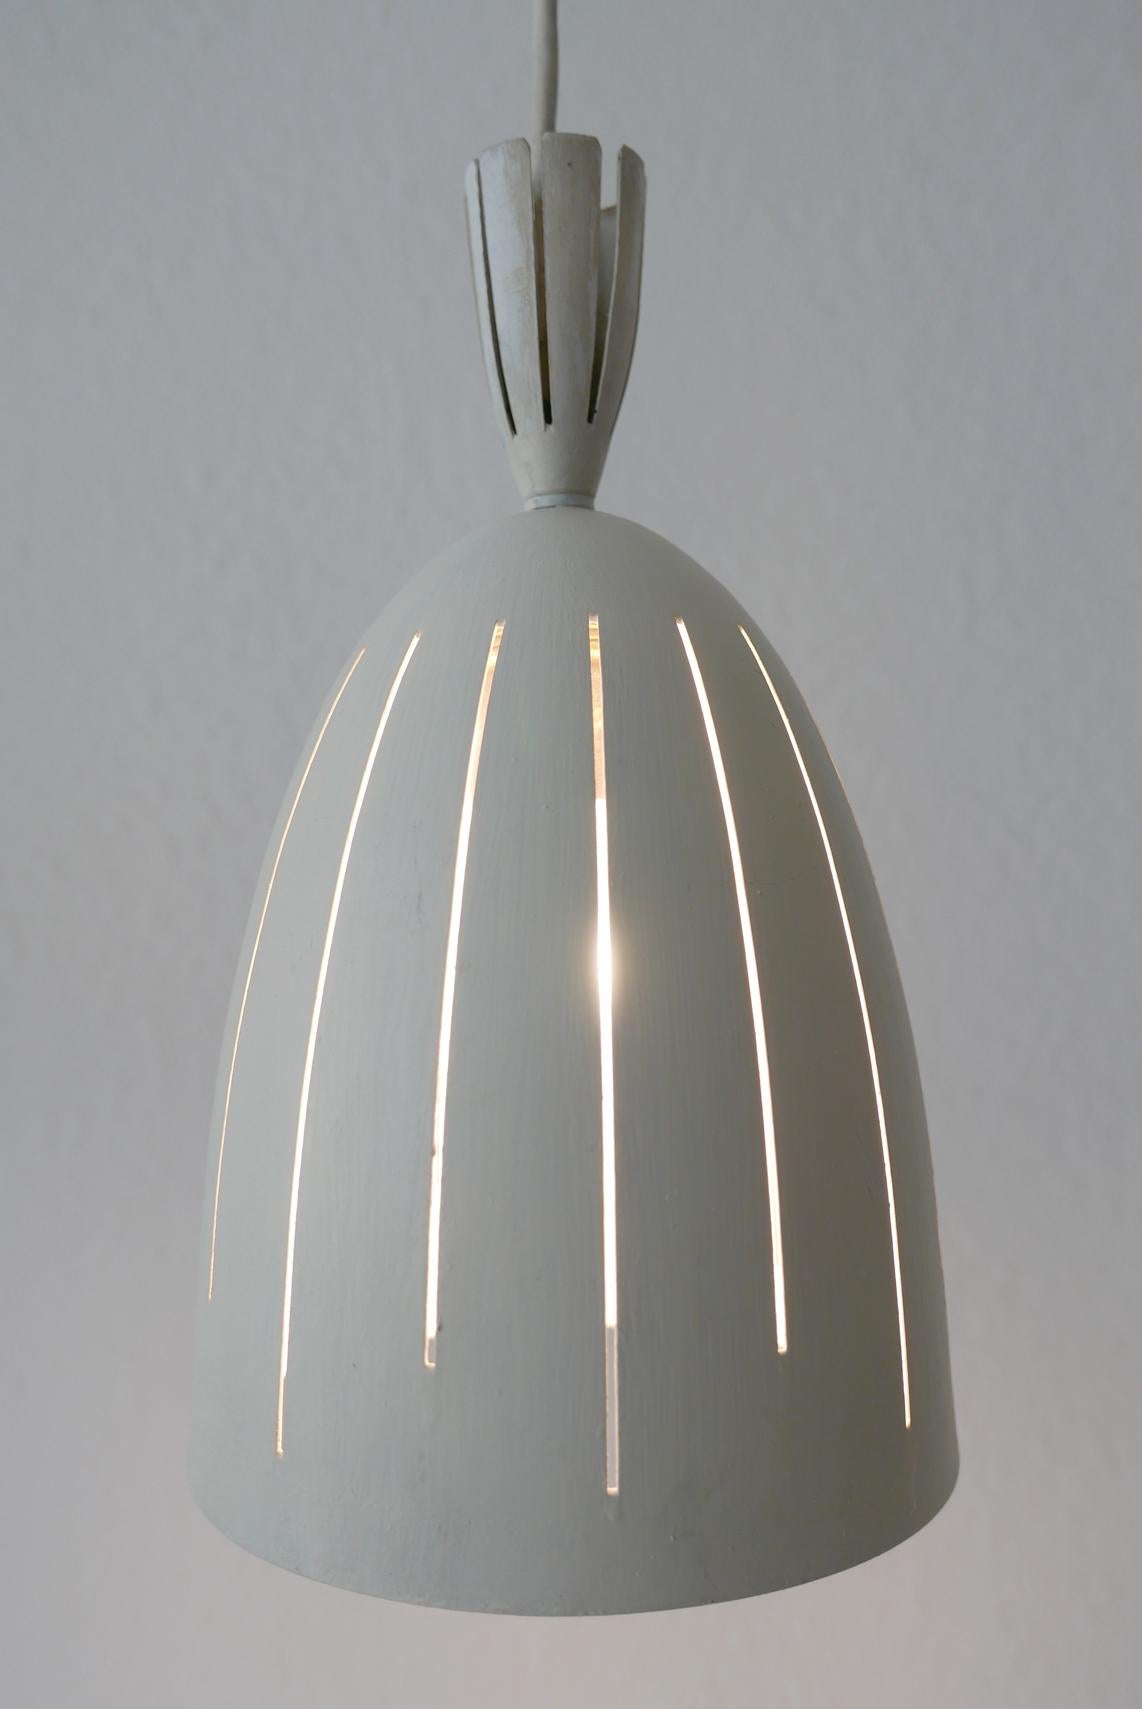 Set of Three Lovely Mid-Century Modern Diabolo Pendant Lamps, 1950s, Germany For Sale 5